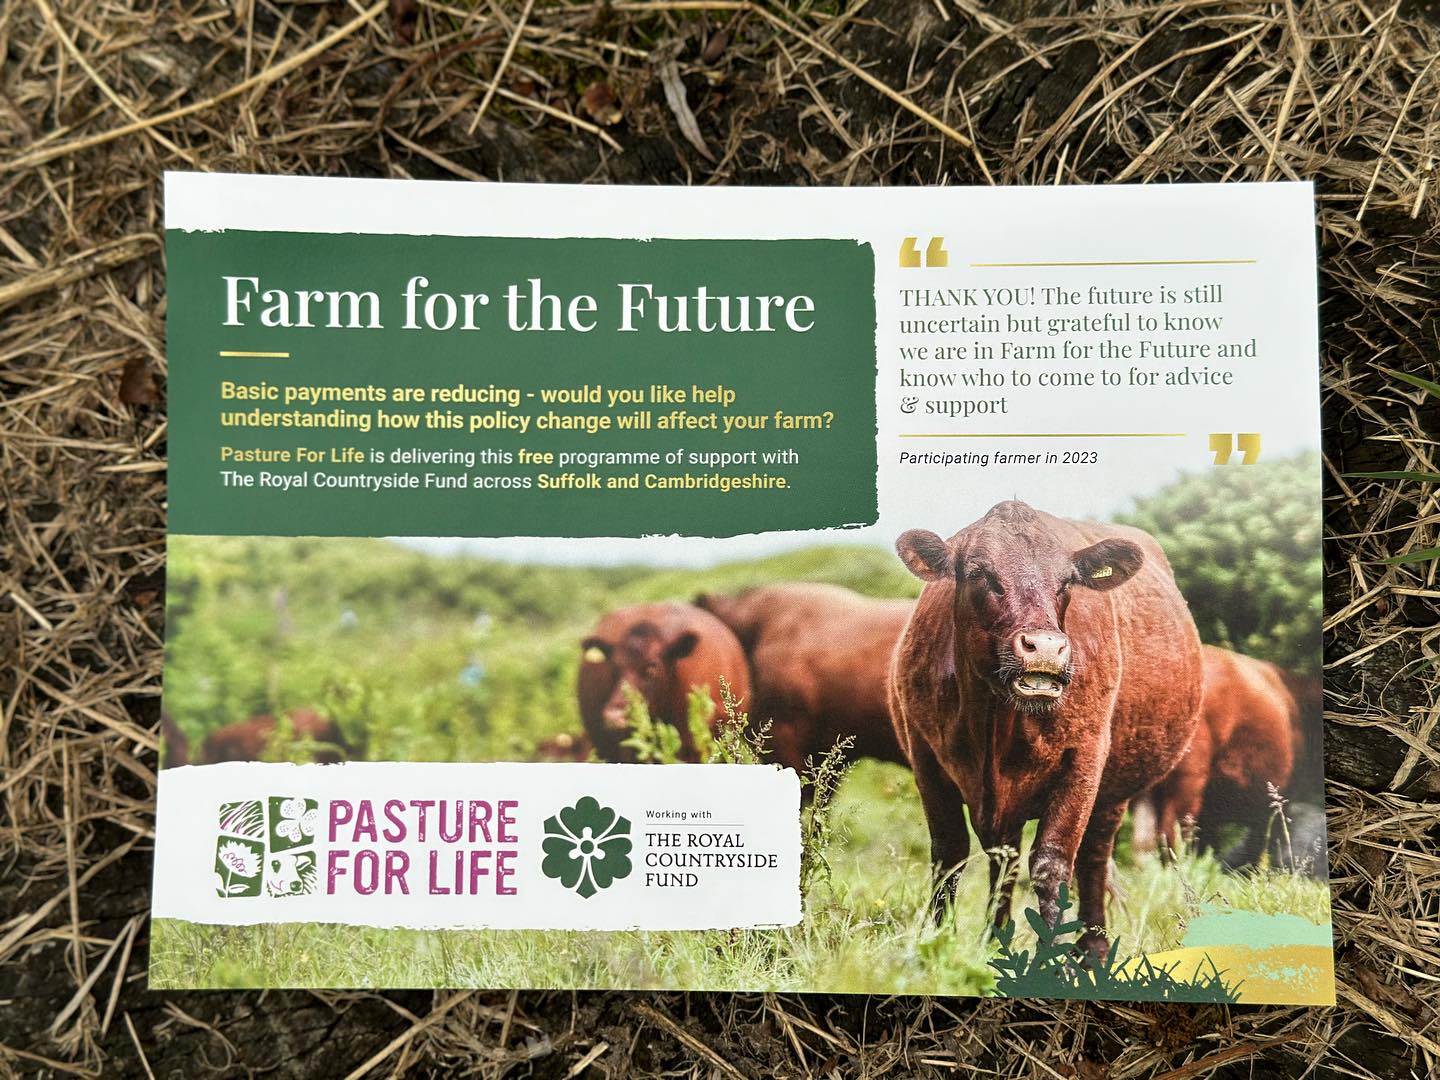 PfL Launches Farm for the Future programme